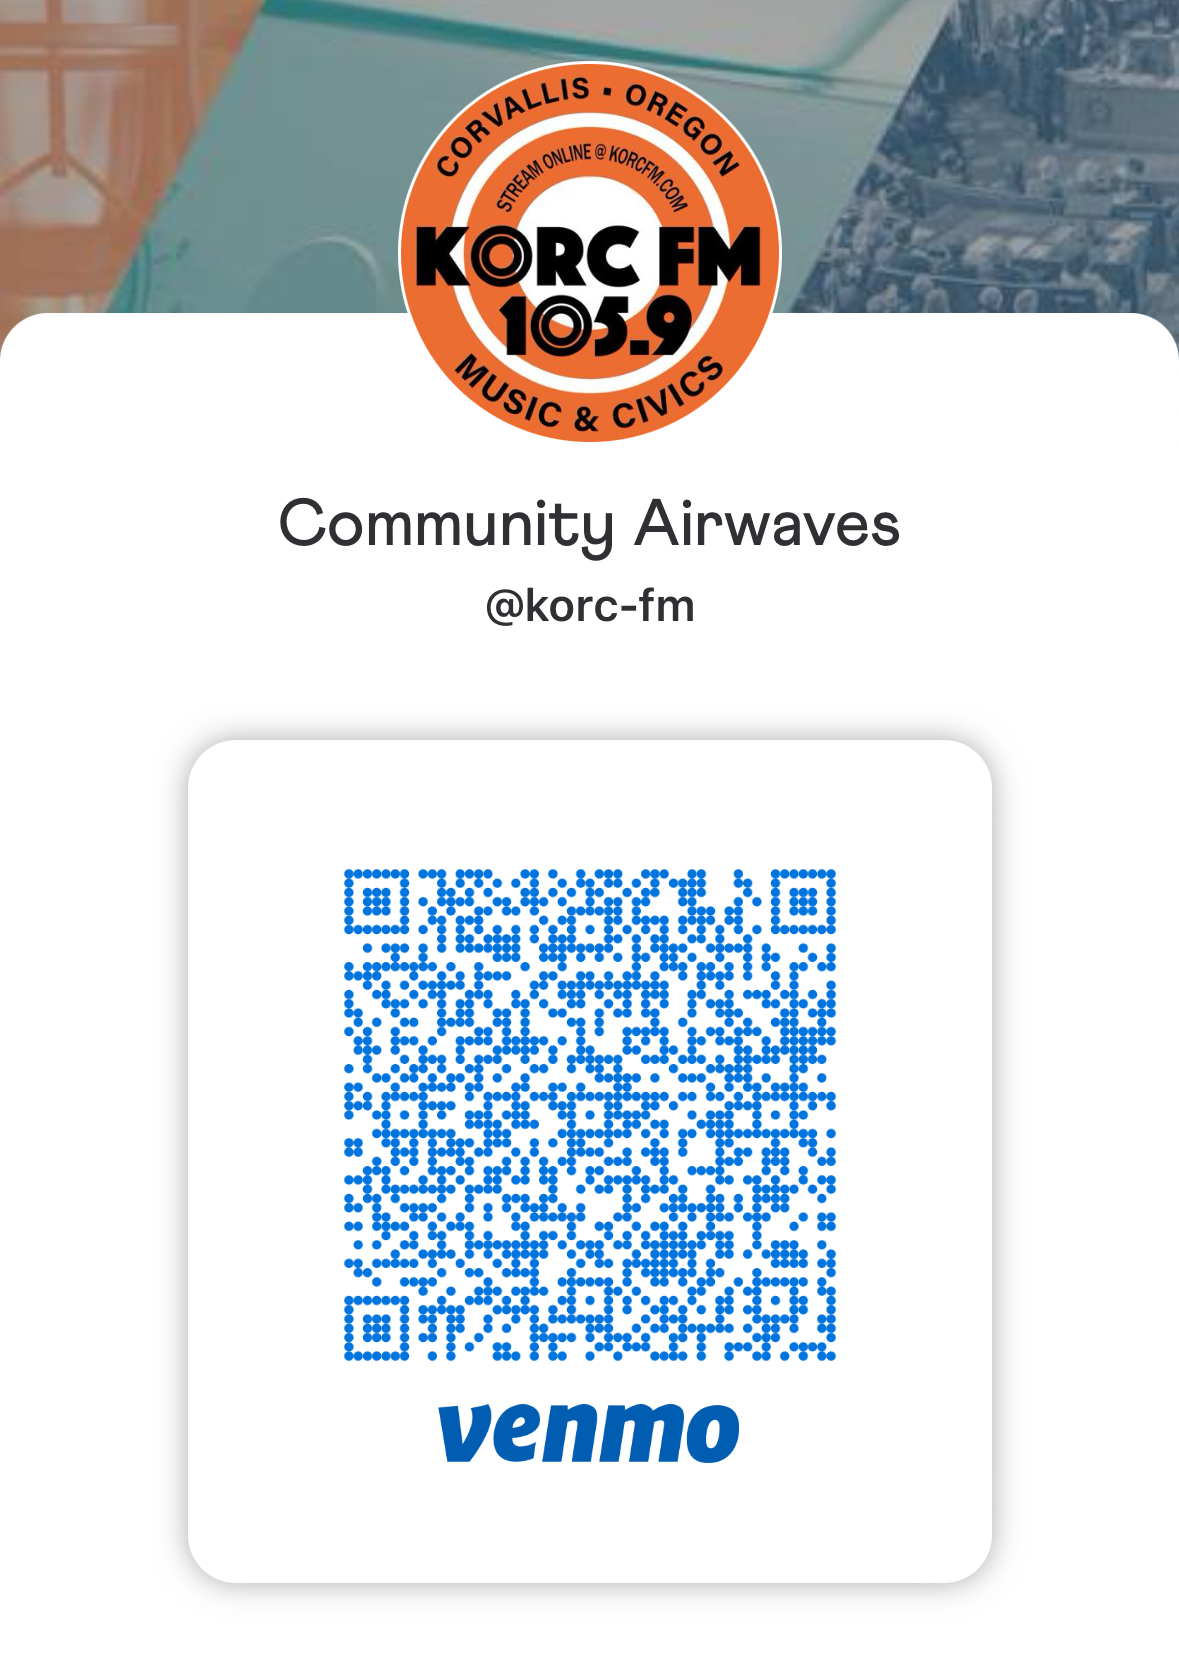 Scan to connect with Venmo app